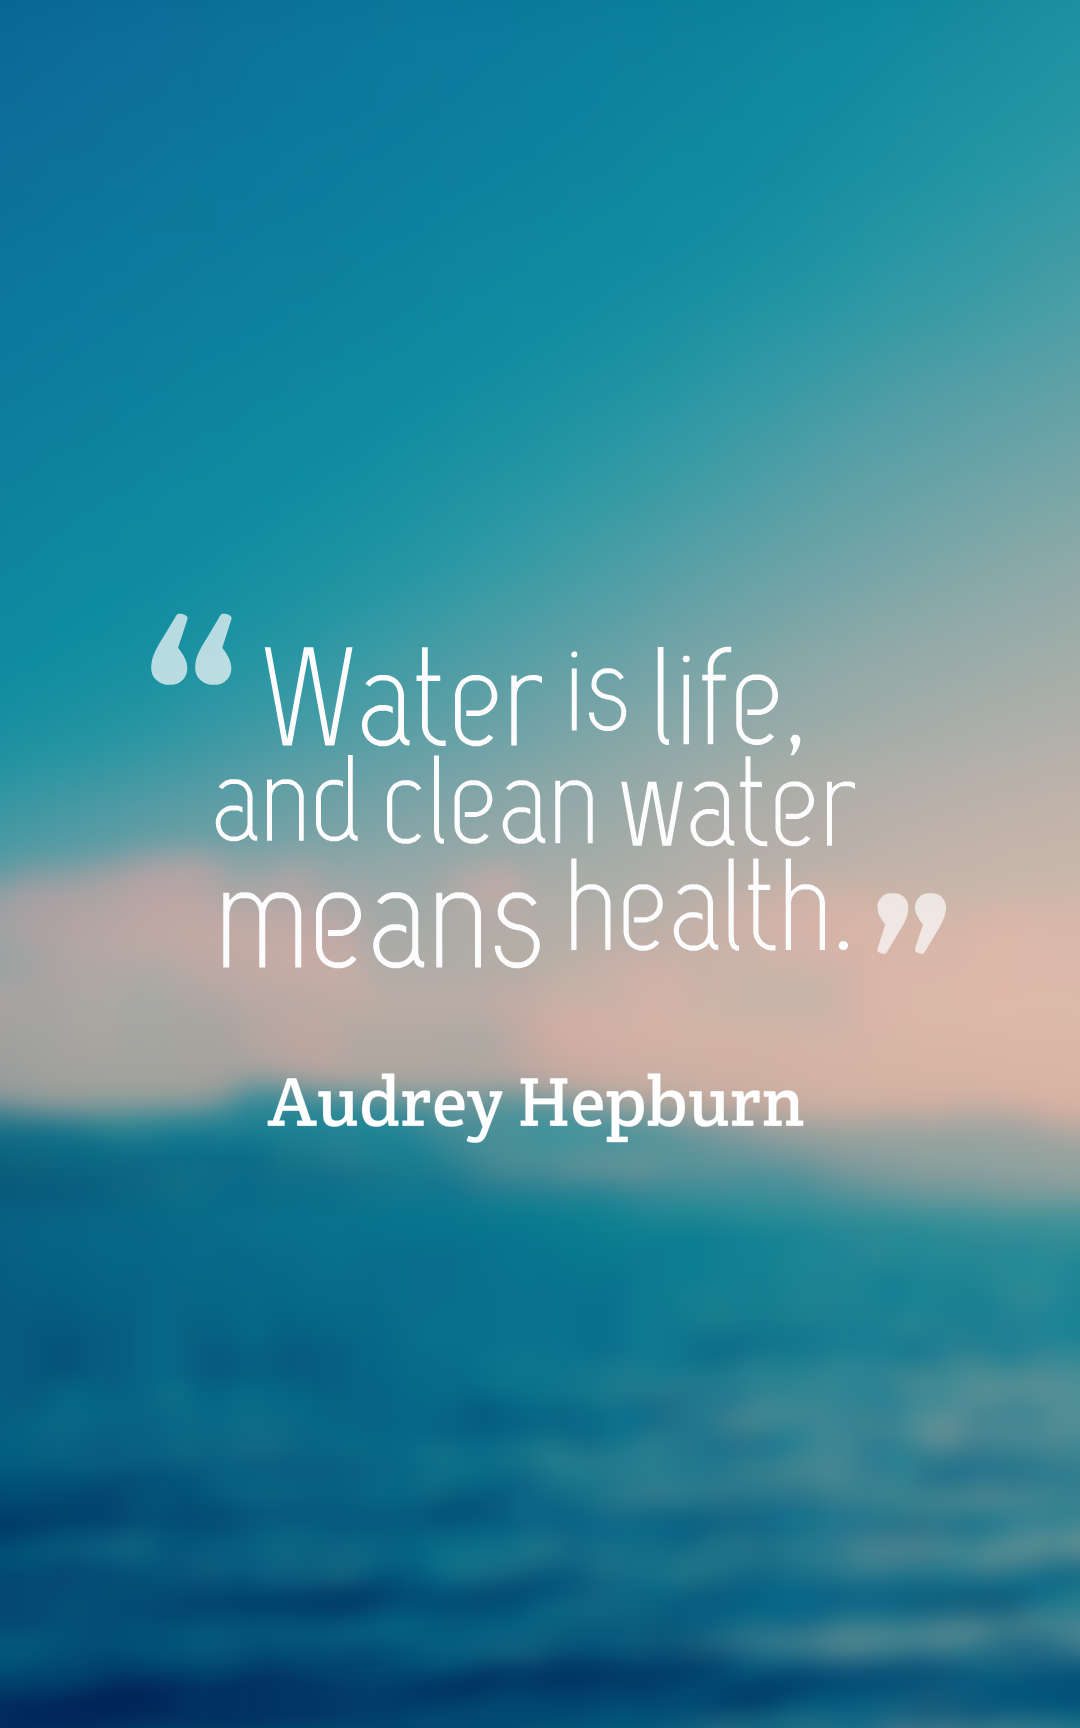 30 Inspirational Water Quotes And Sayings